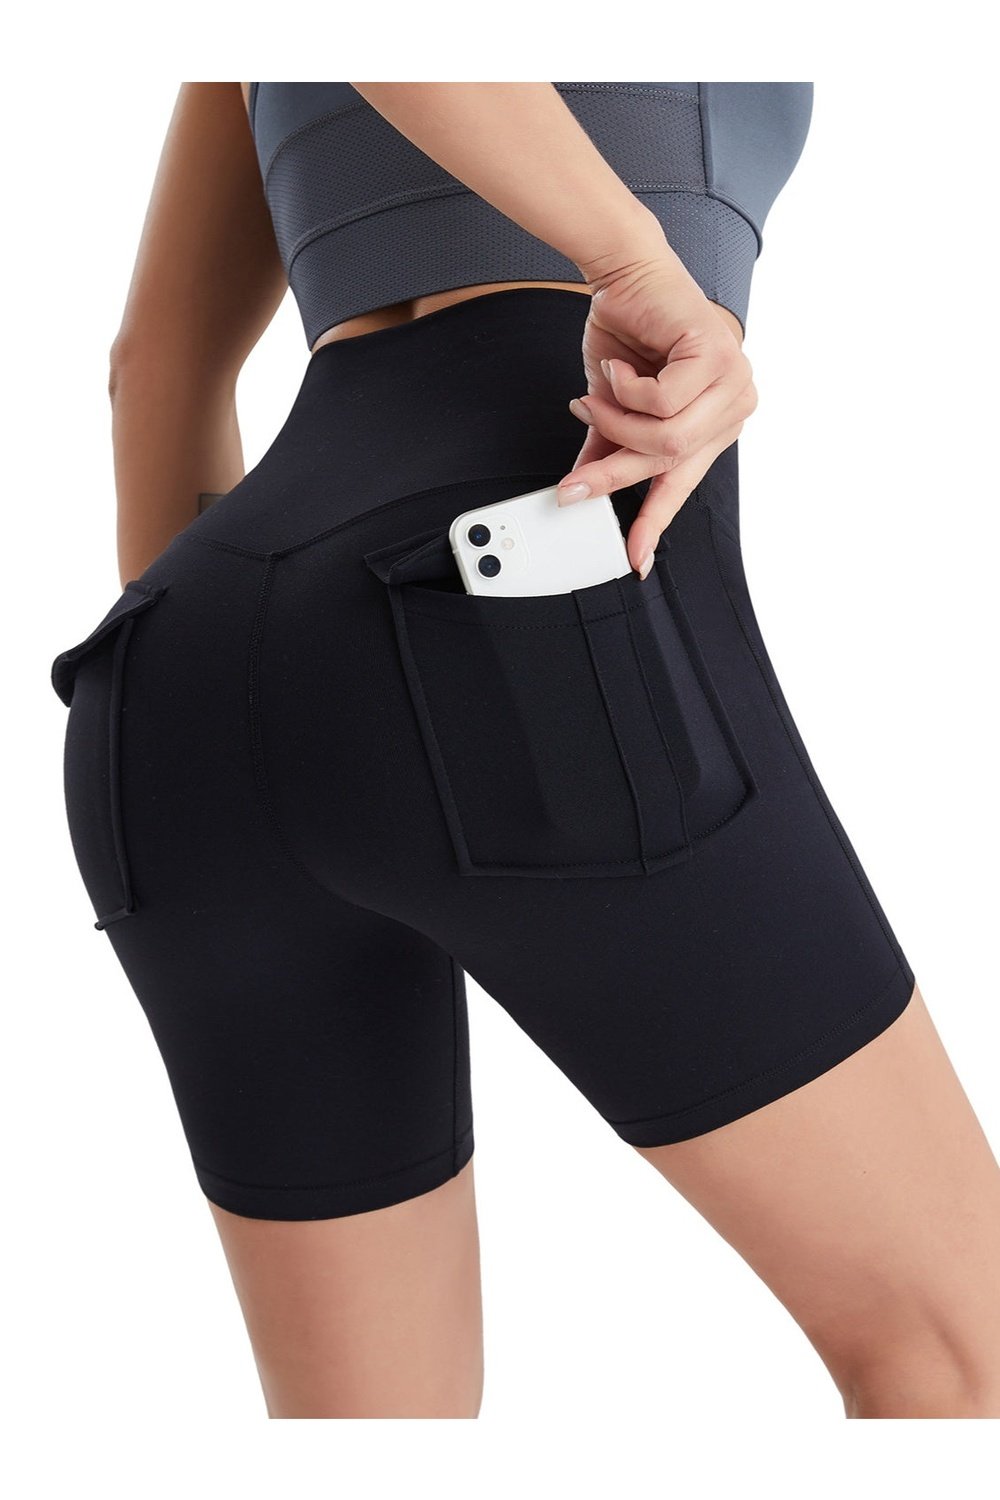 Pocketed High Waist Active Shorts - Short Leggings - FITGGINS